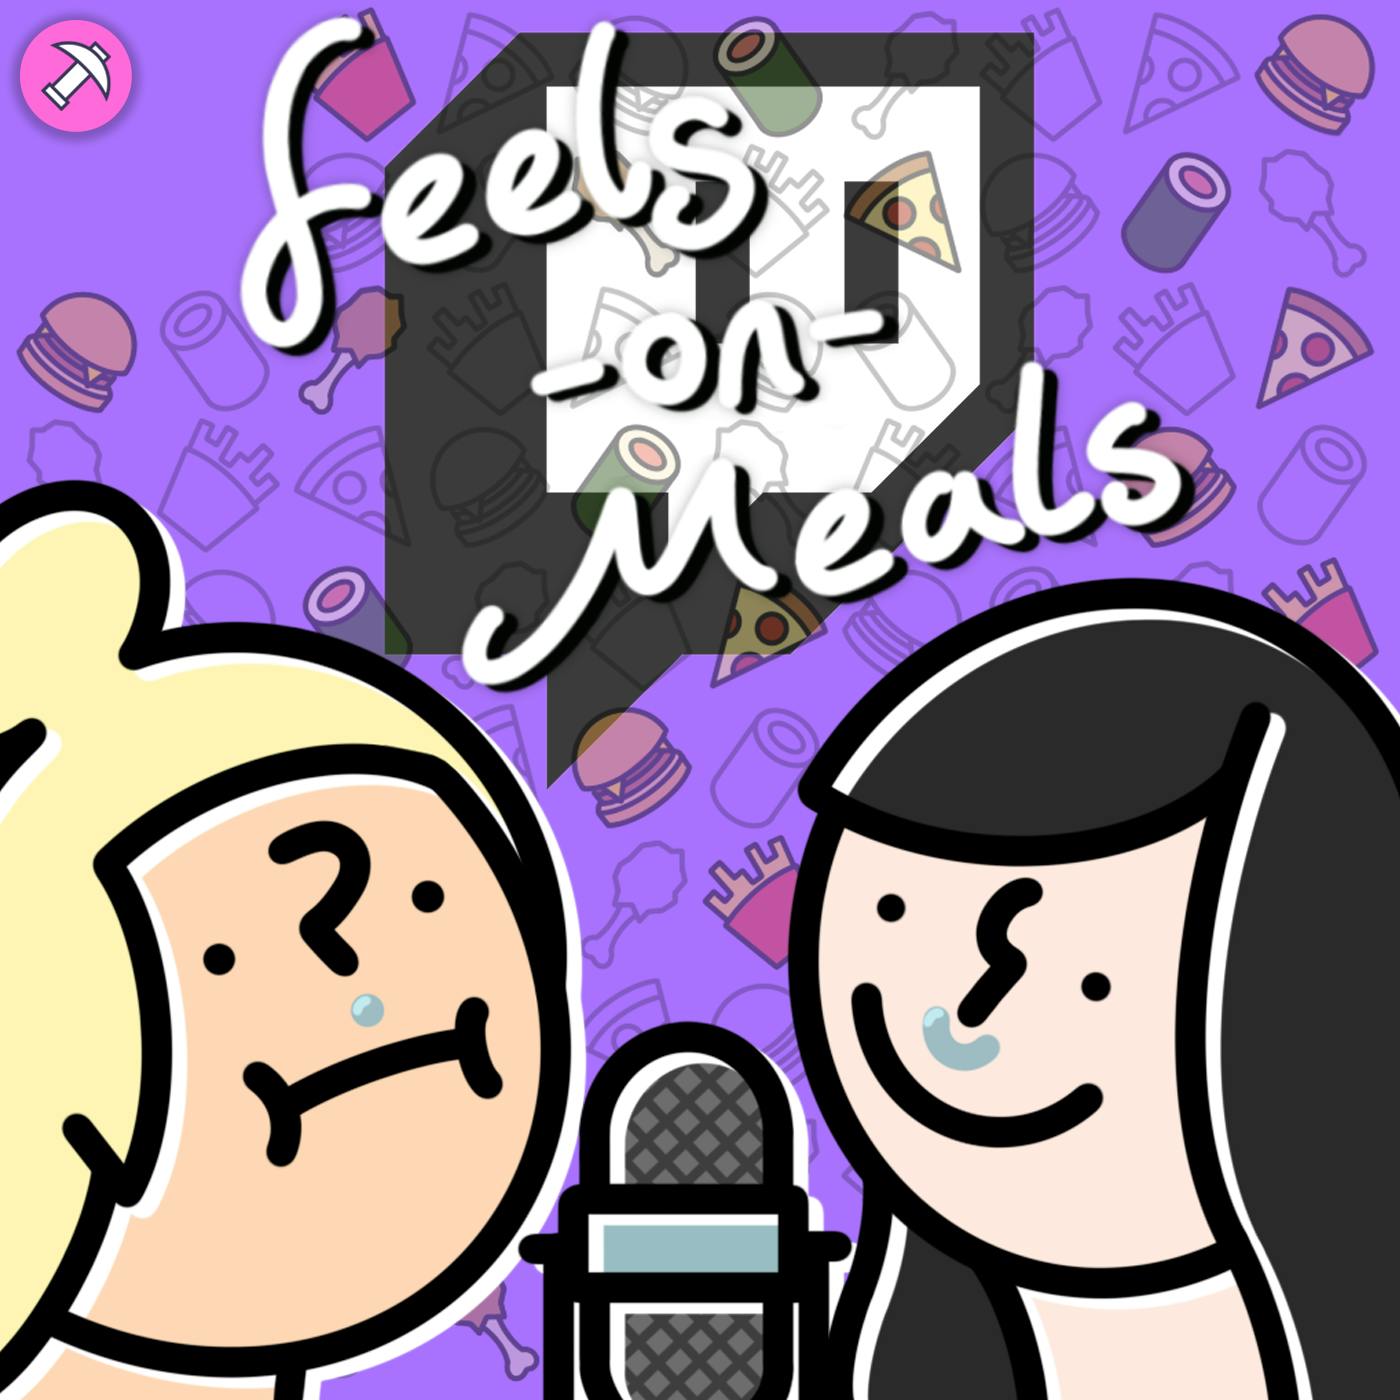 Feels on Meals Live!